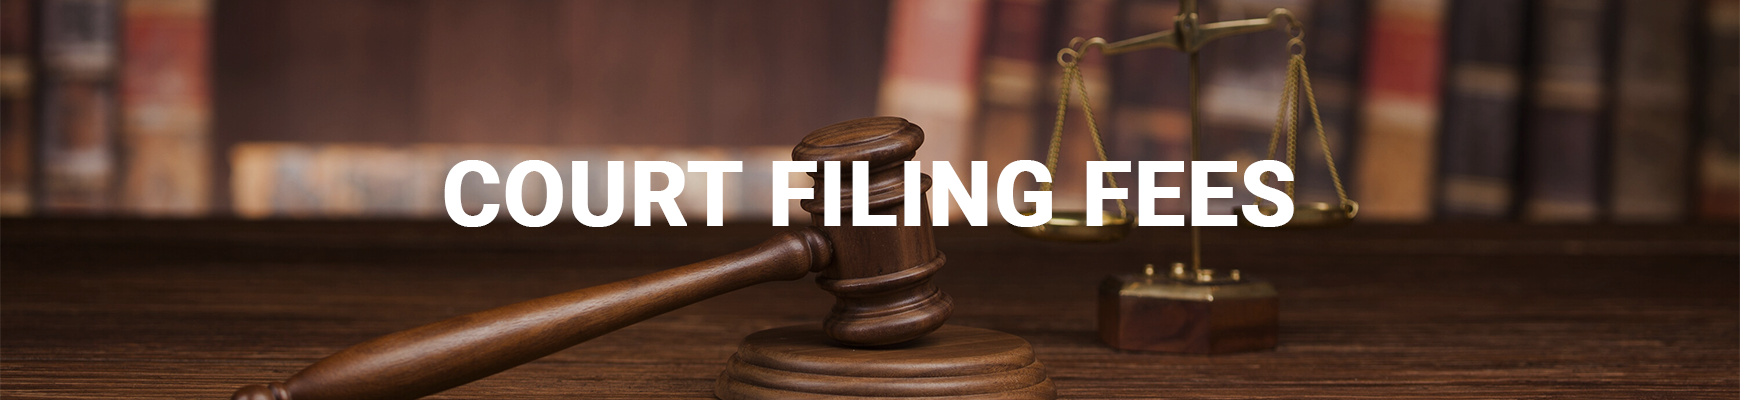 Court Filing Fees gt Justice Court Filing Fees